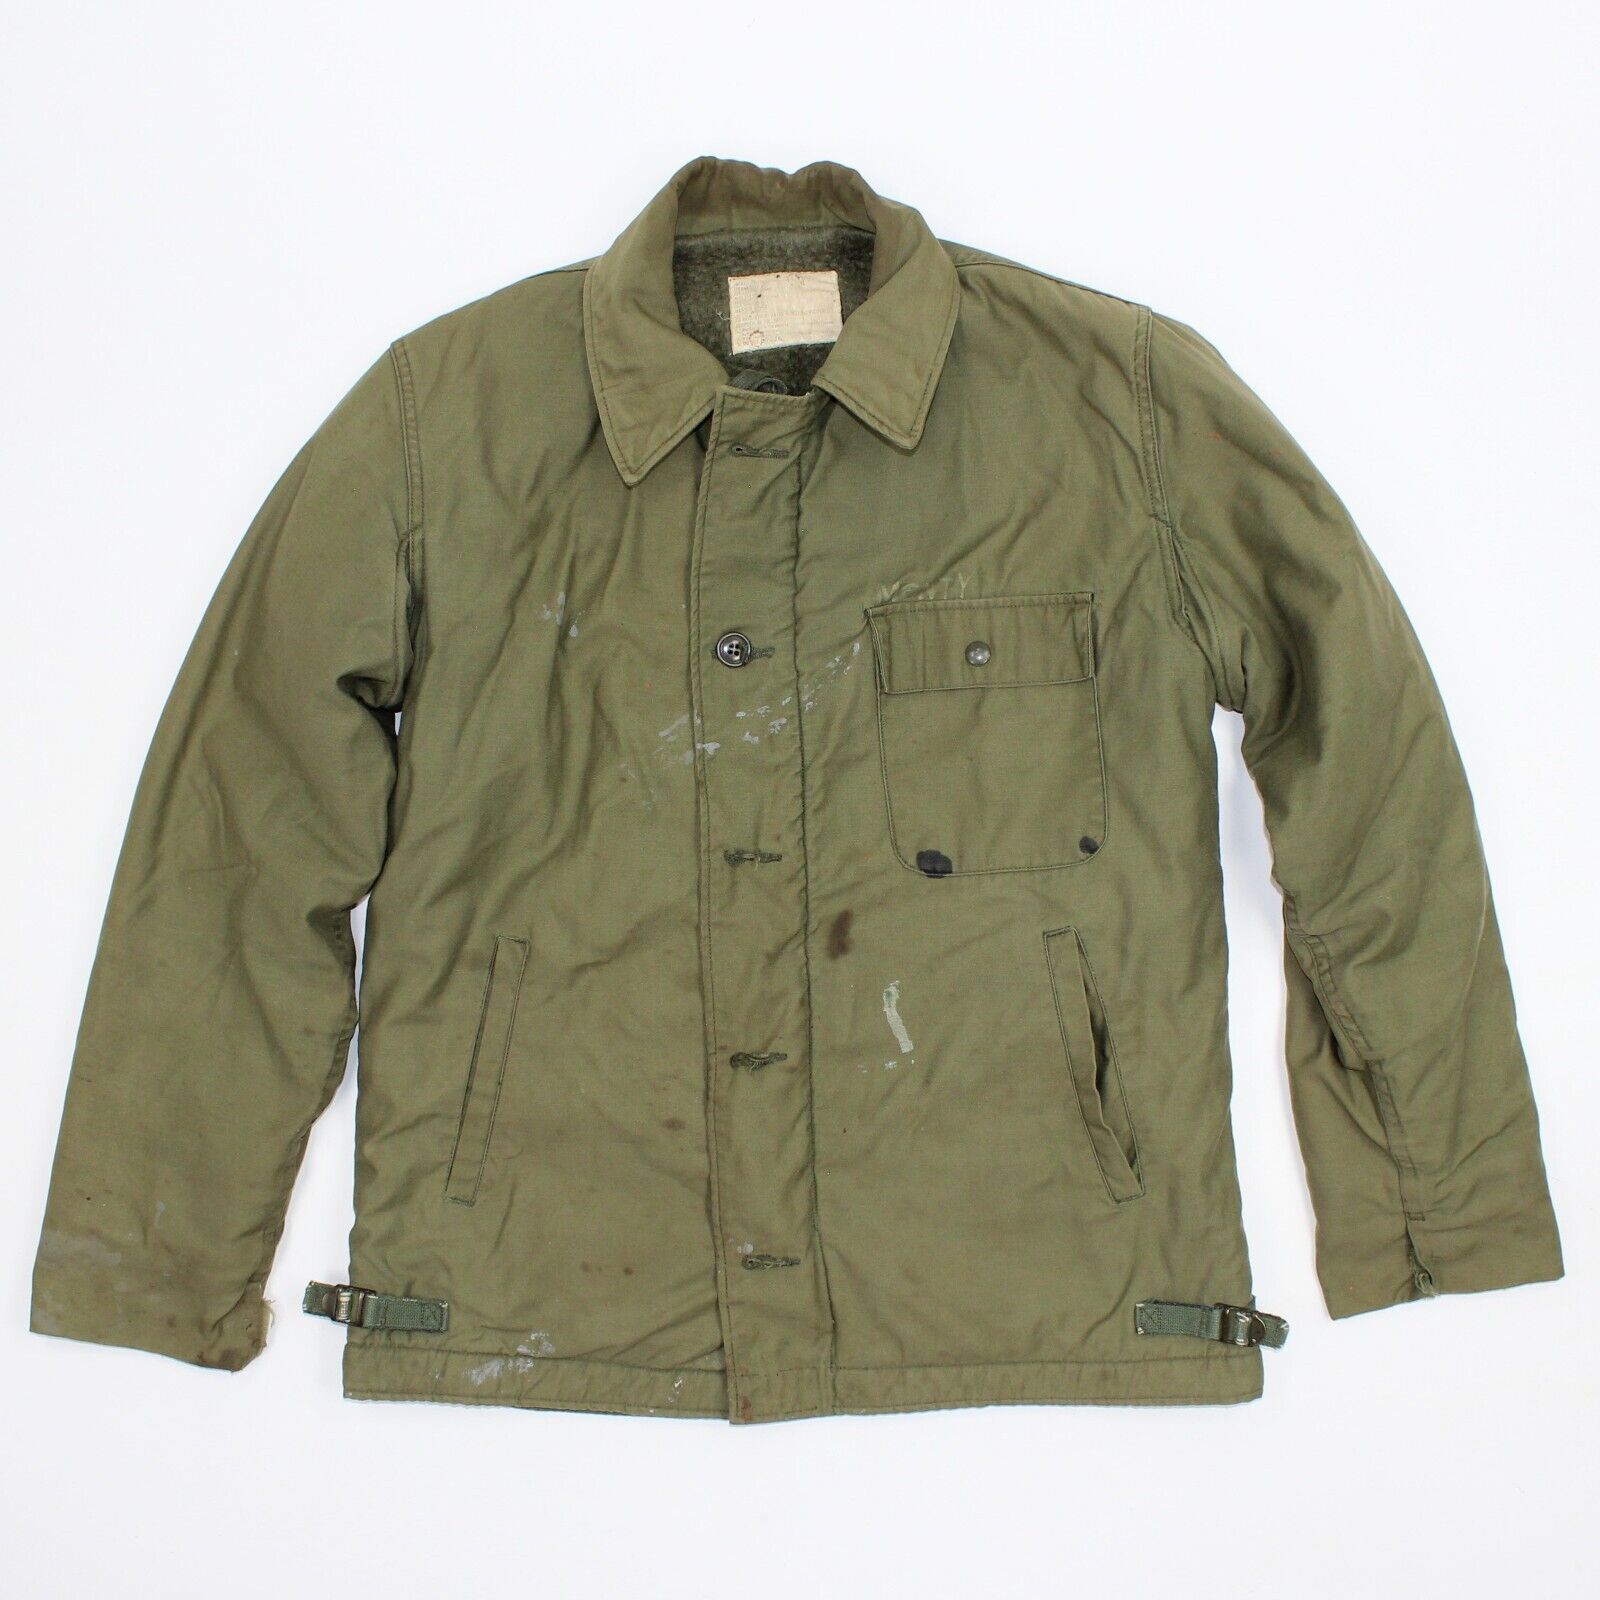 Vintage 1975 Military Cold Weather Permable Deck Jacket Size Medium M Distressed